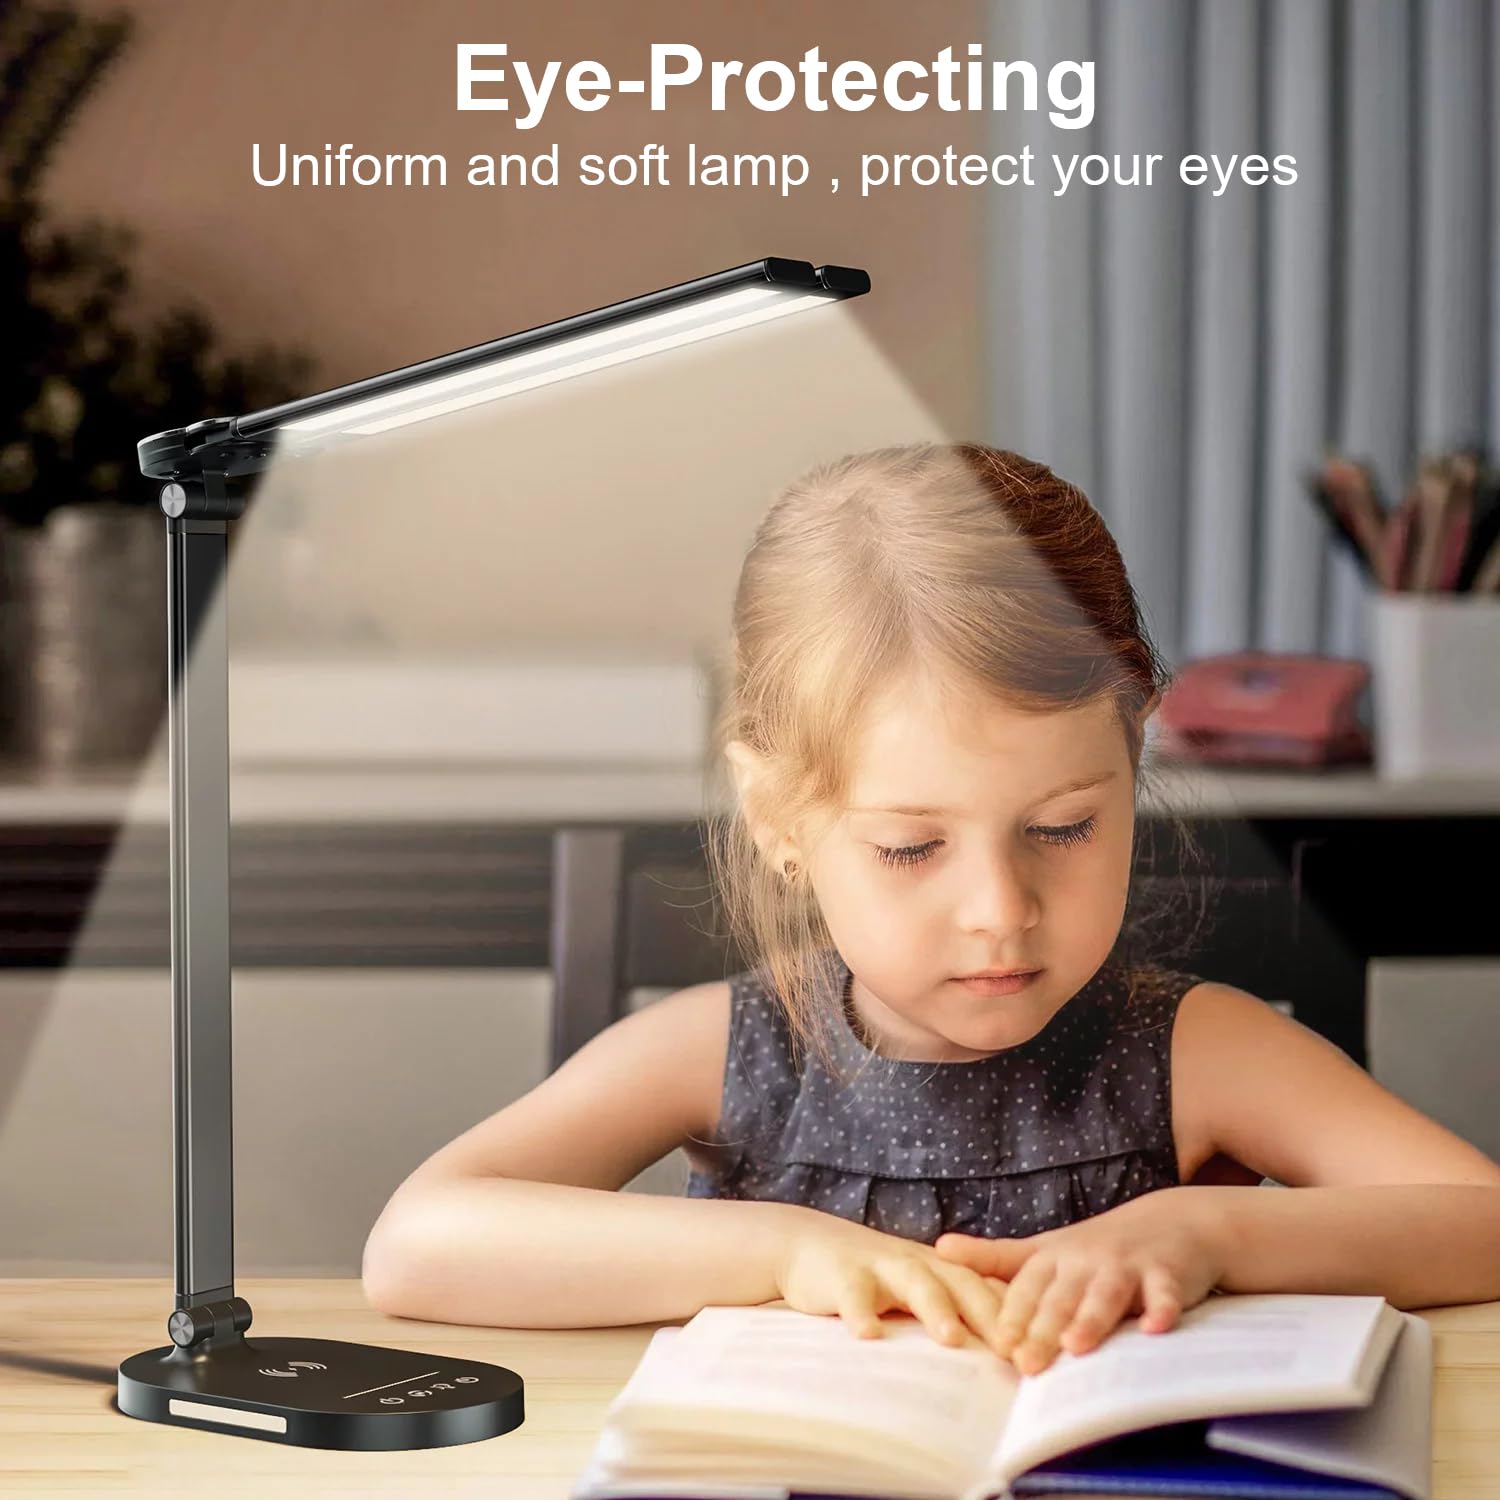 LED Desk Lamps for Home Office, Double Head Touch Desk Lamp with Wireless Charger, Dimmable Desk Light with USB Charging Port, Adjustable Reading Lamp, Eye-Caring Table Lamp with Night Light, 1H Timer